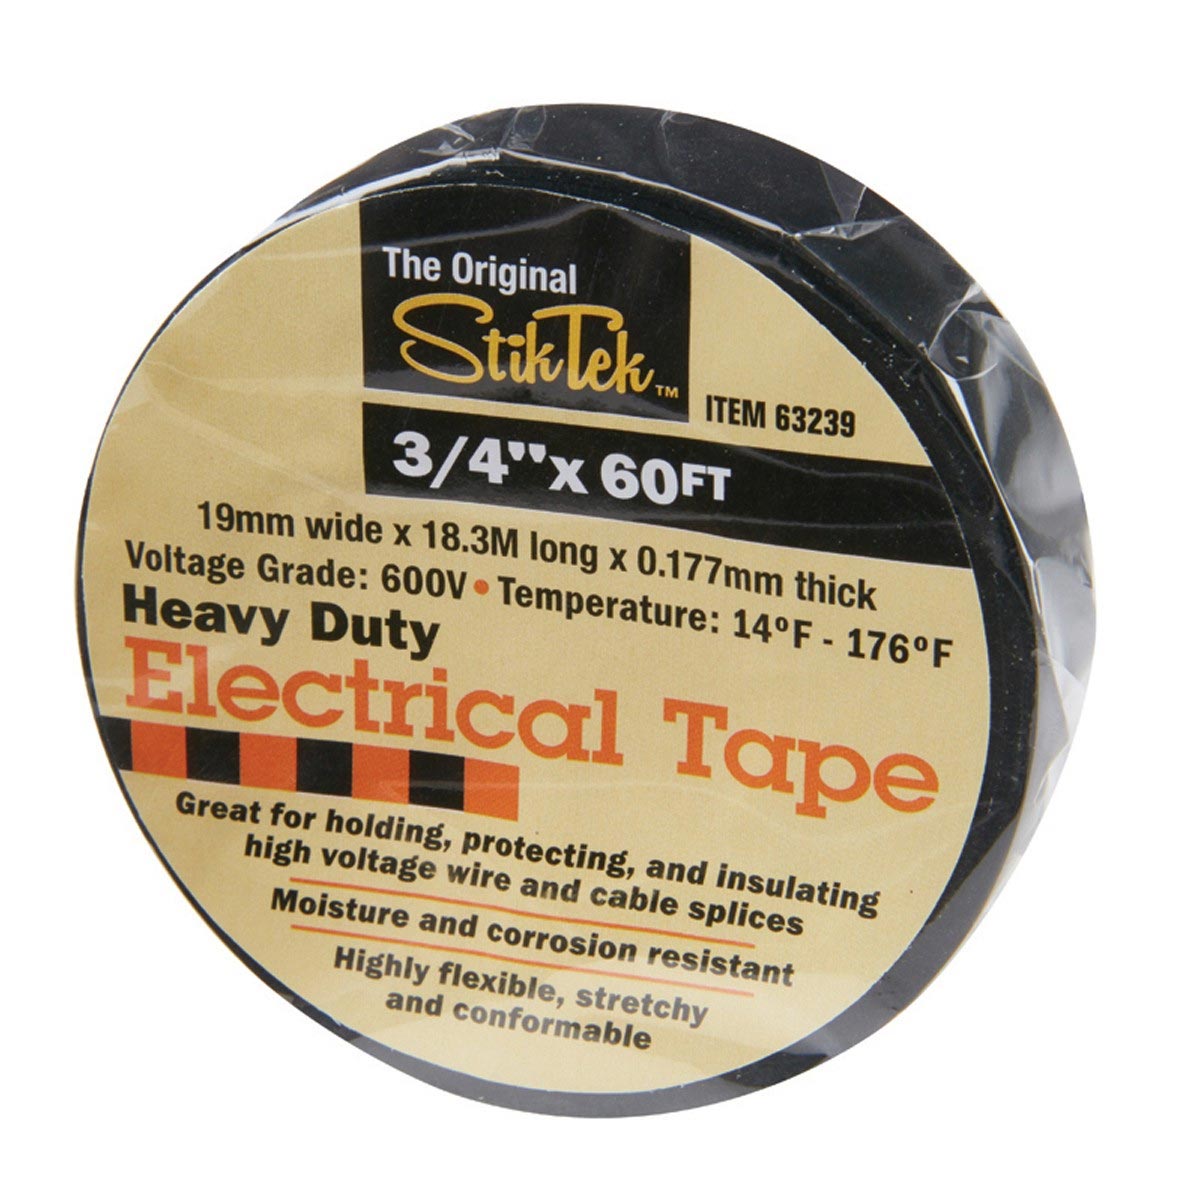 Black Electrical Tape 5MZ89 3/4 in x 60 Ft Industrial Grade Electrical Tape